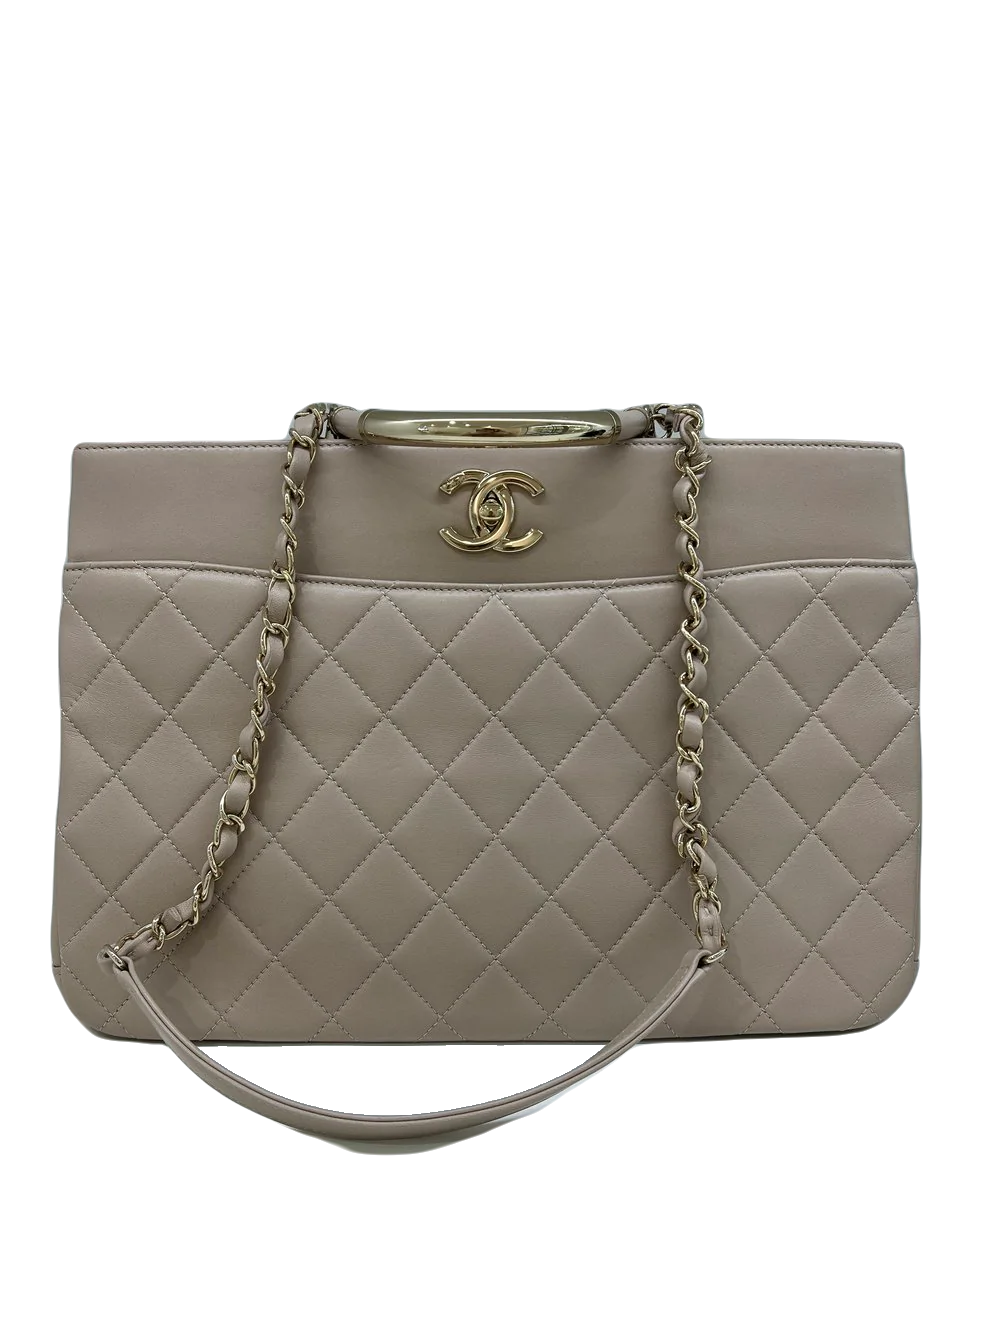 Chanel Large Carry Chic Shopper - Nude - SOLD